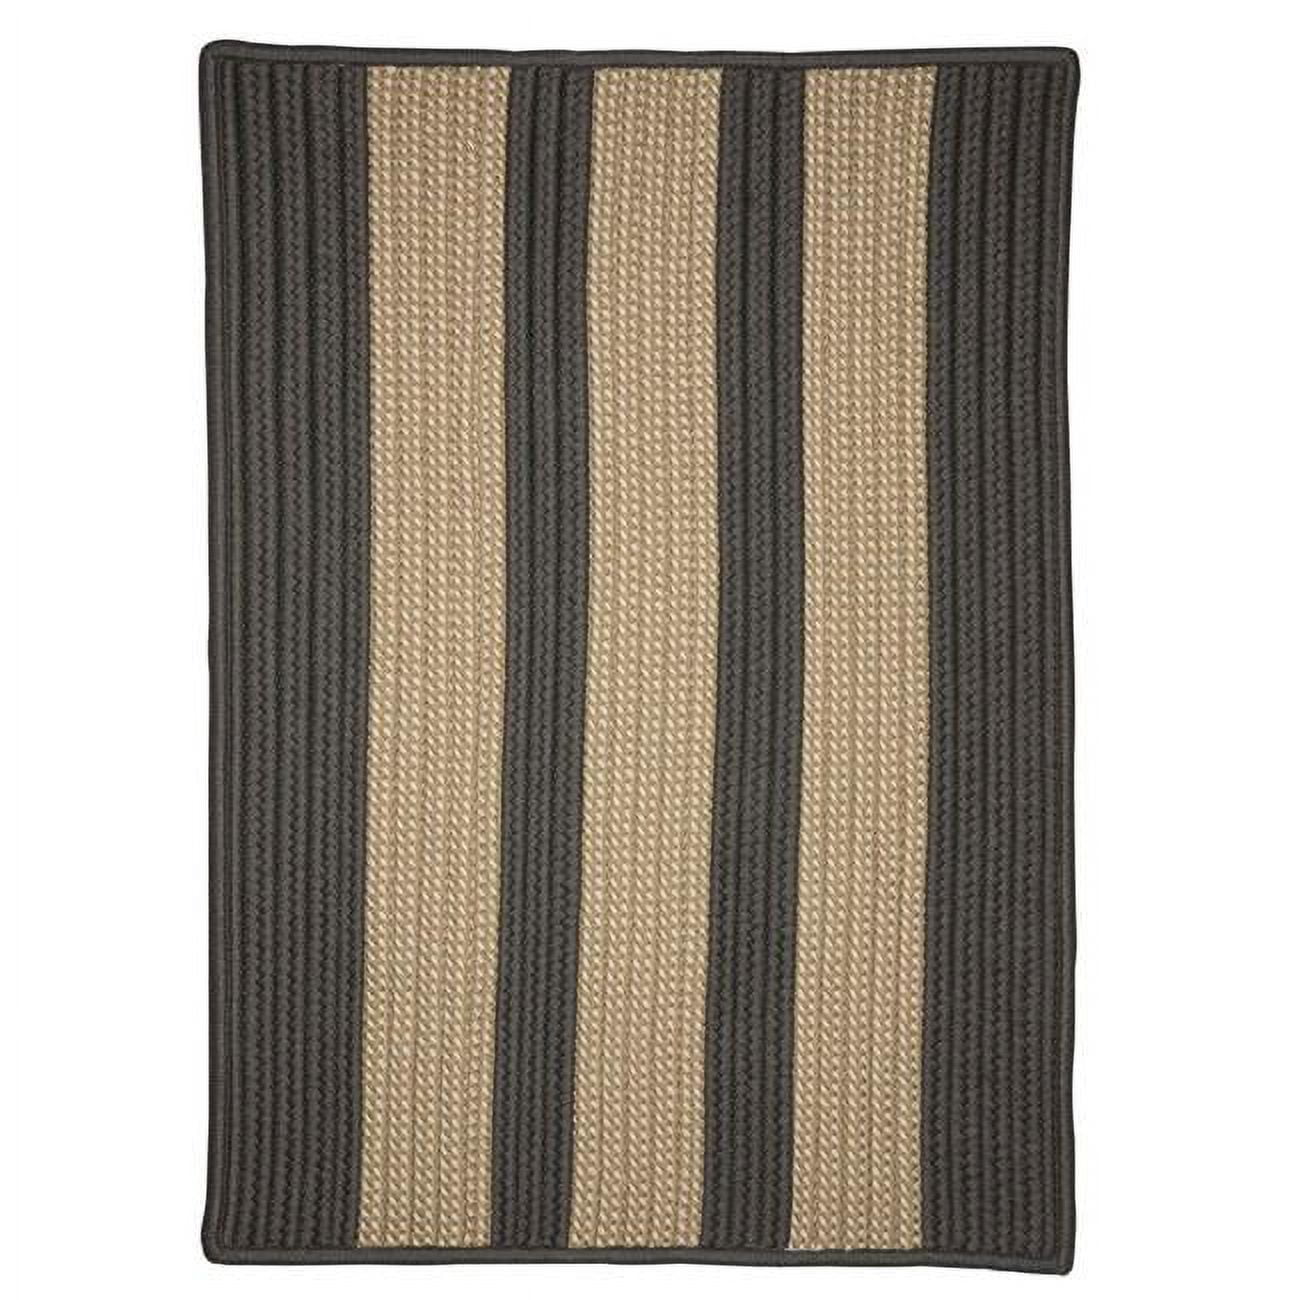 Bt29a015x015s 15 X 15 In. Boat House Gray Chair Pad Rug